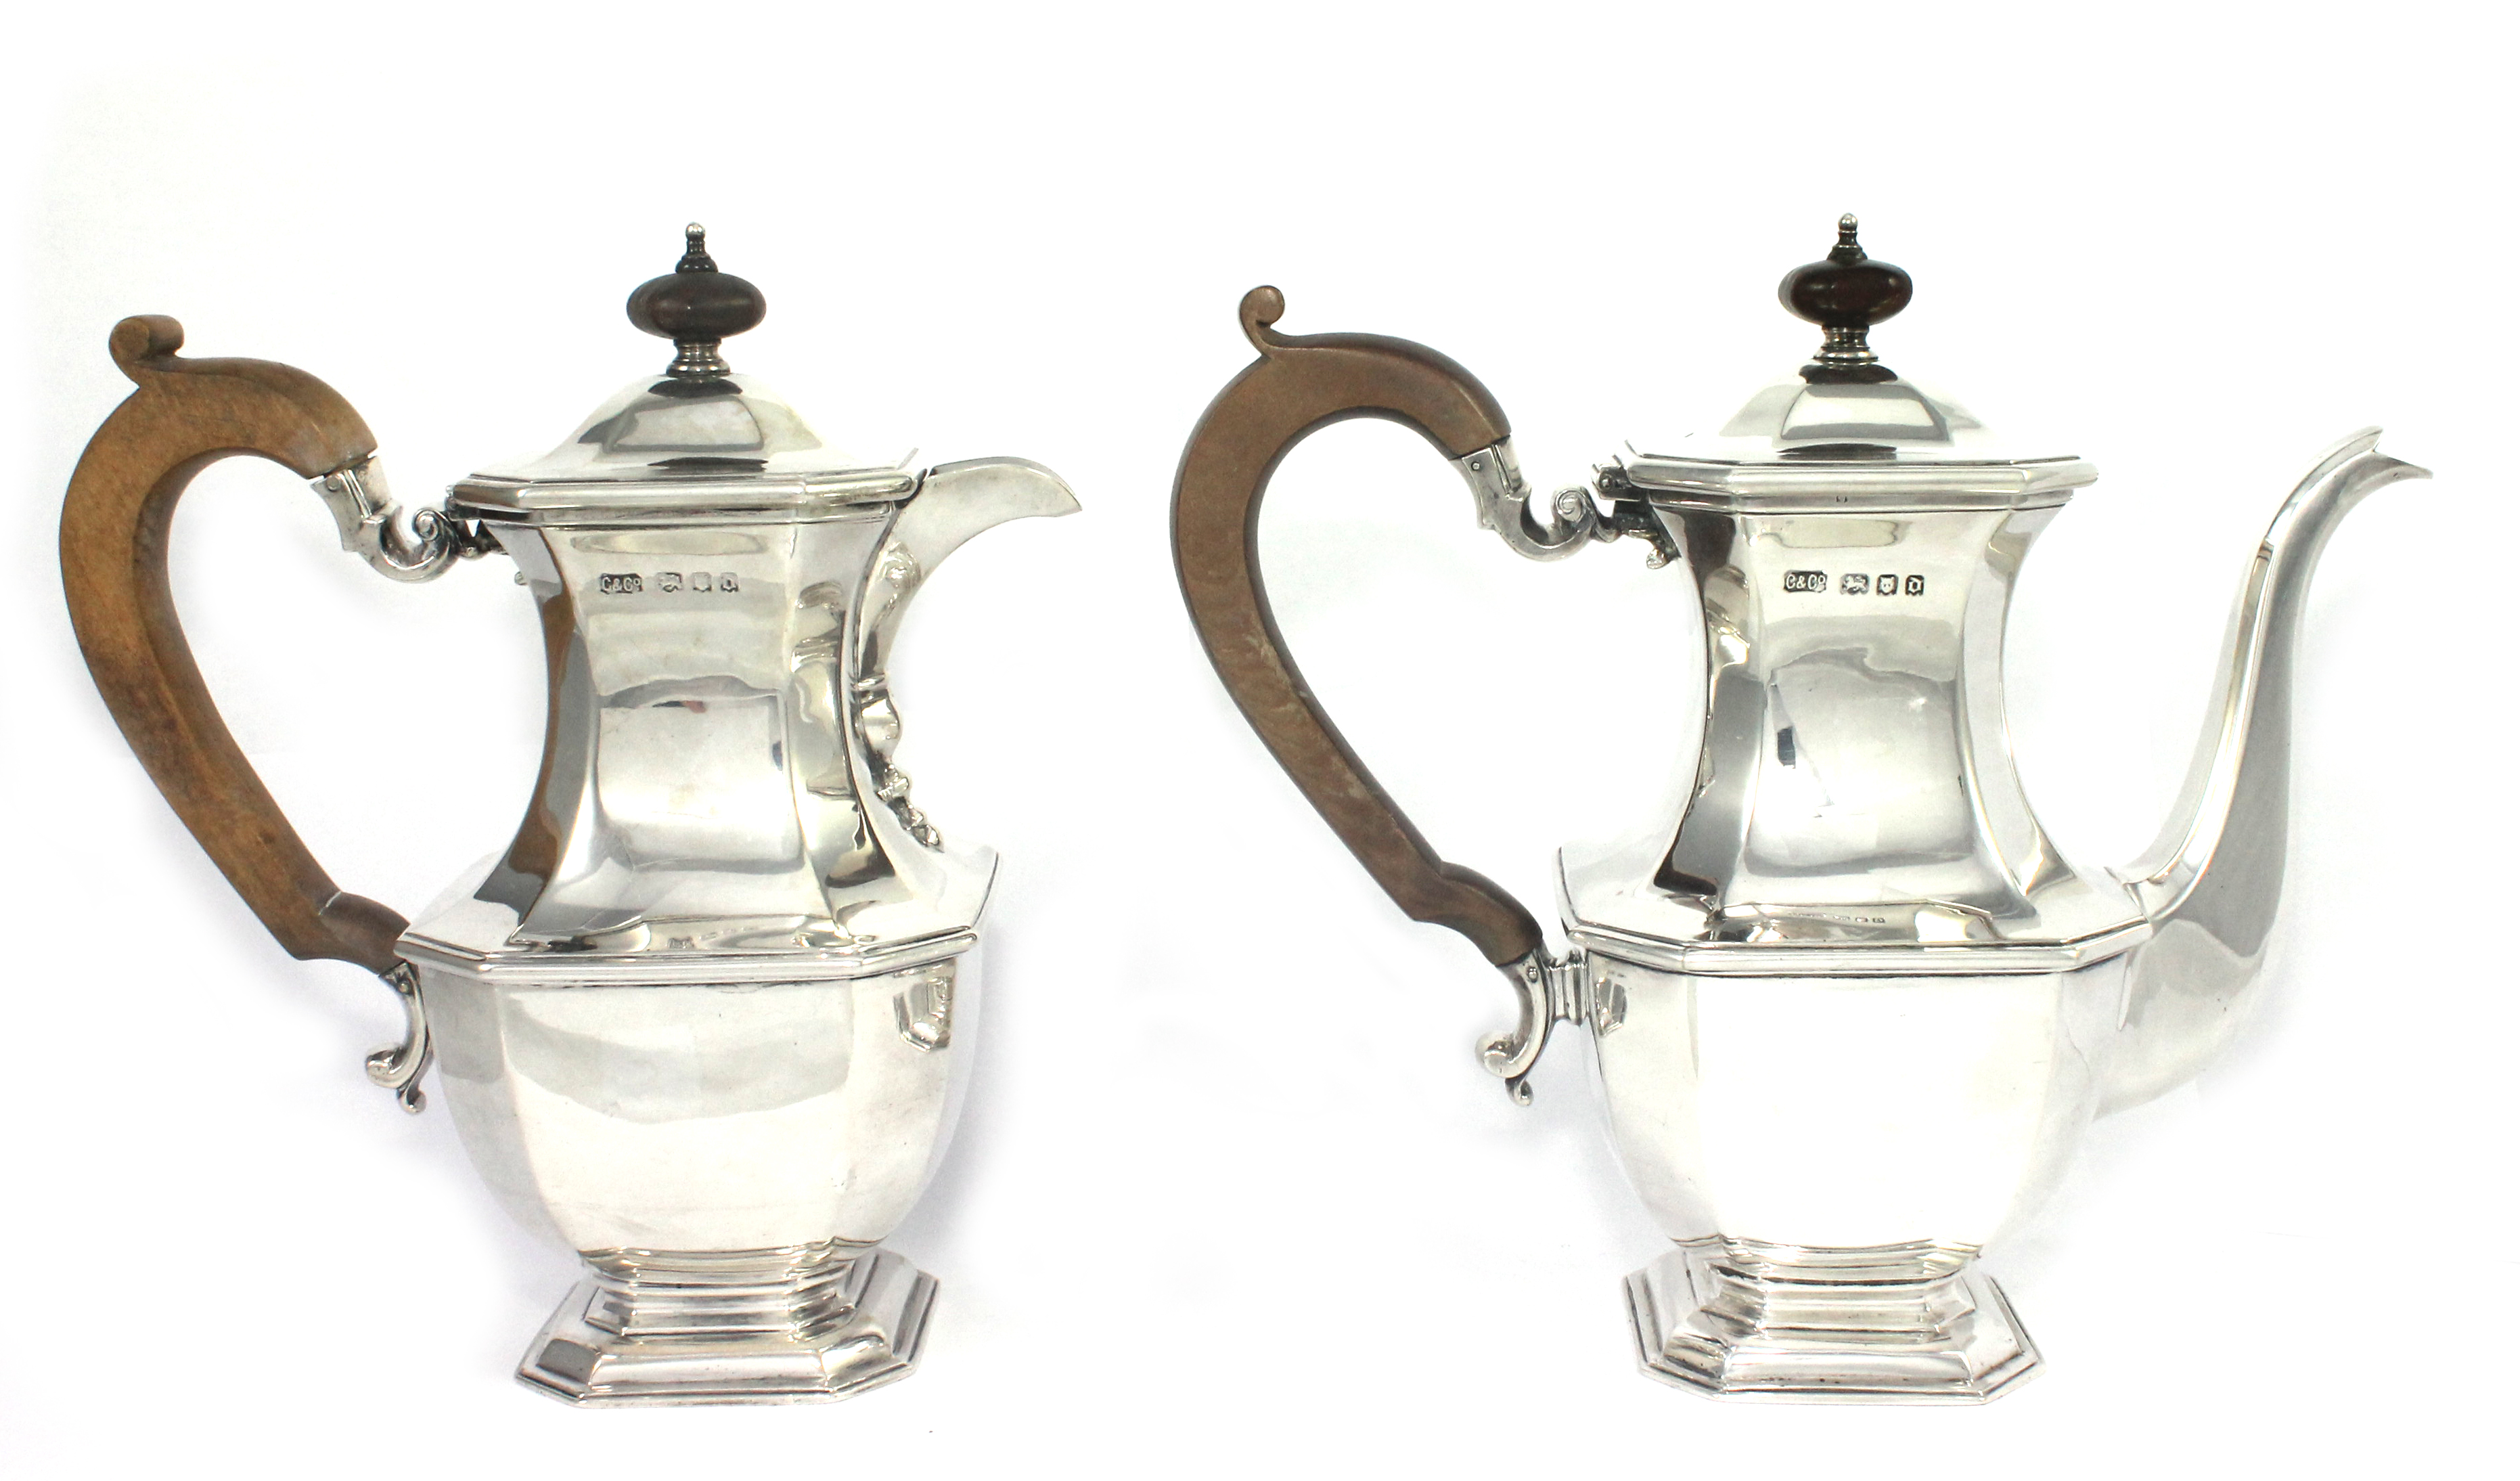 A silver two piece cafe au lait set, each piece of geometric form in the 18th century taste, with